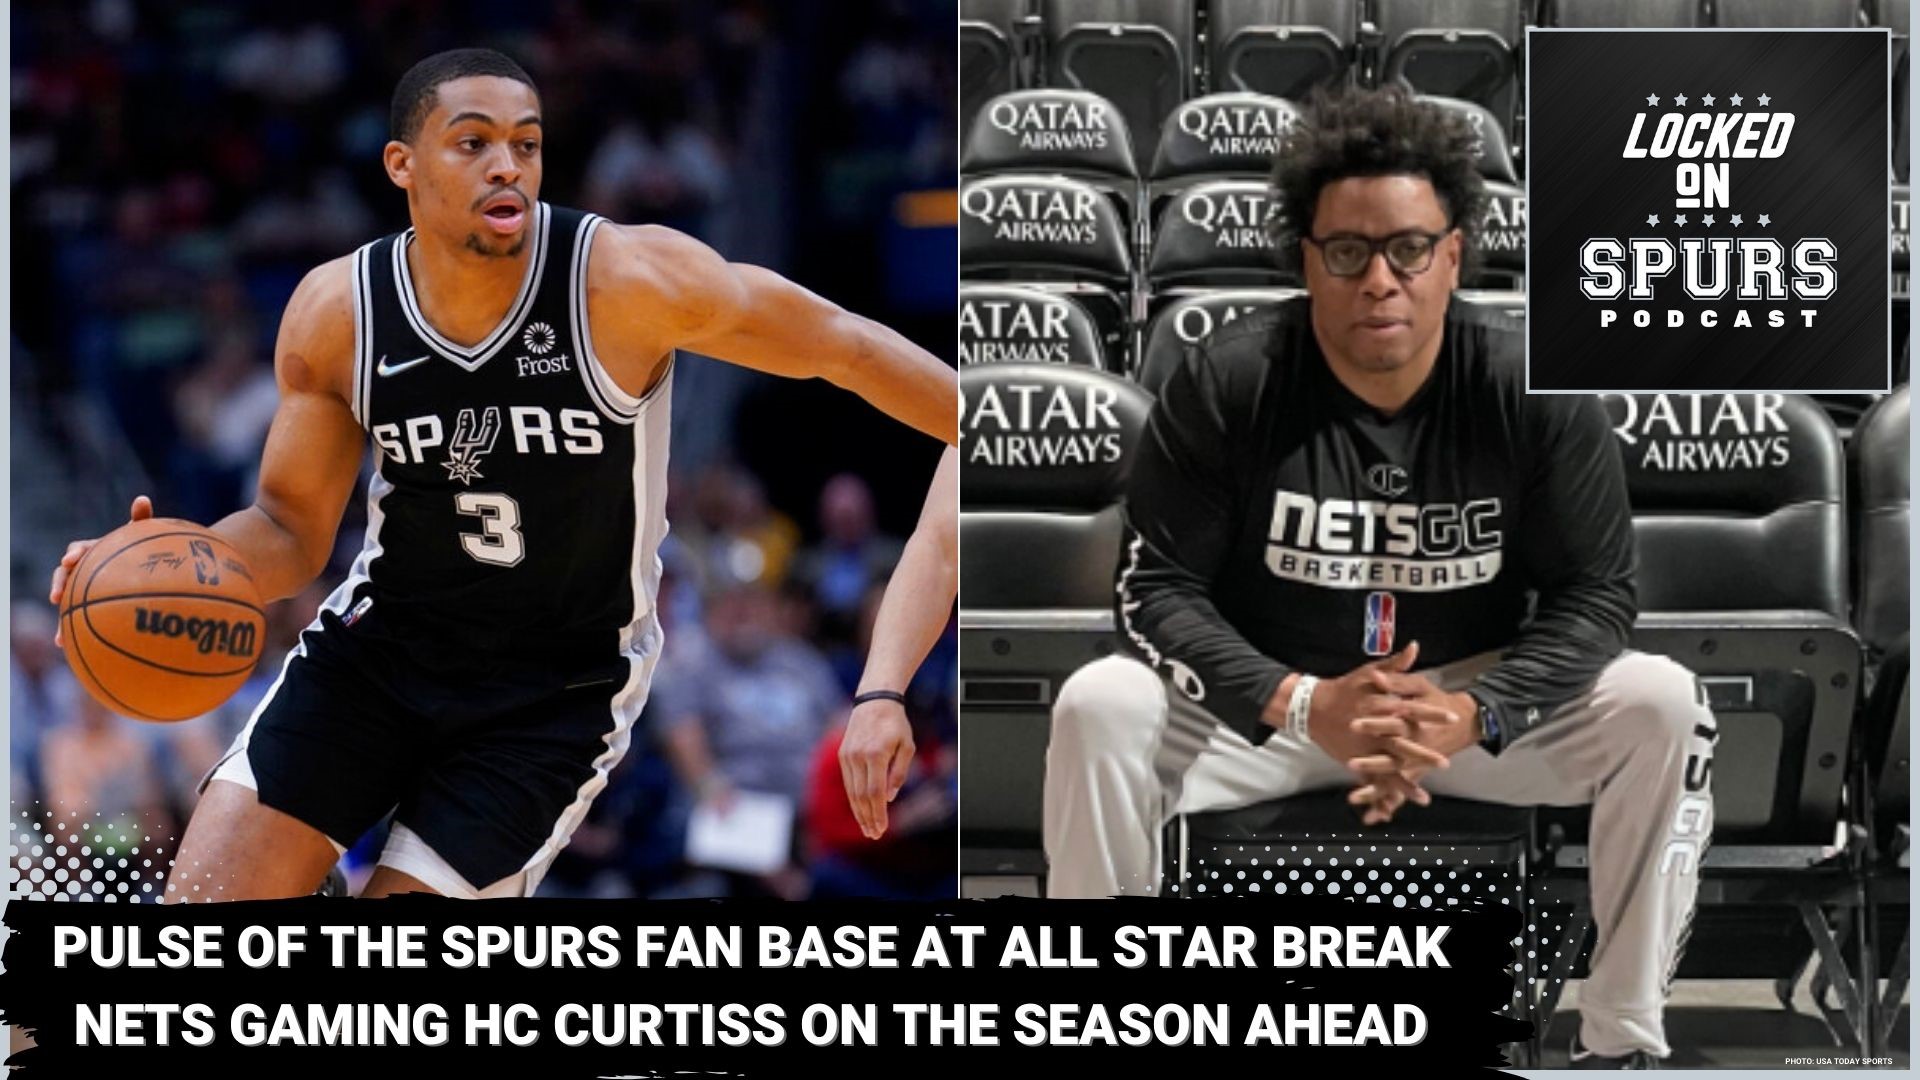 How are Spurs fans doing at the NBA All-Star Break?